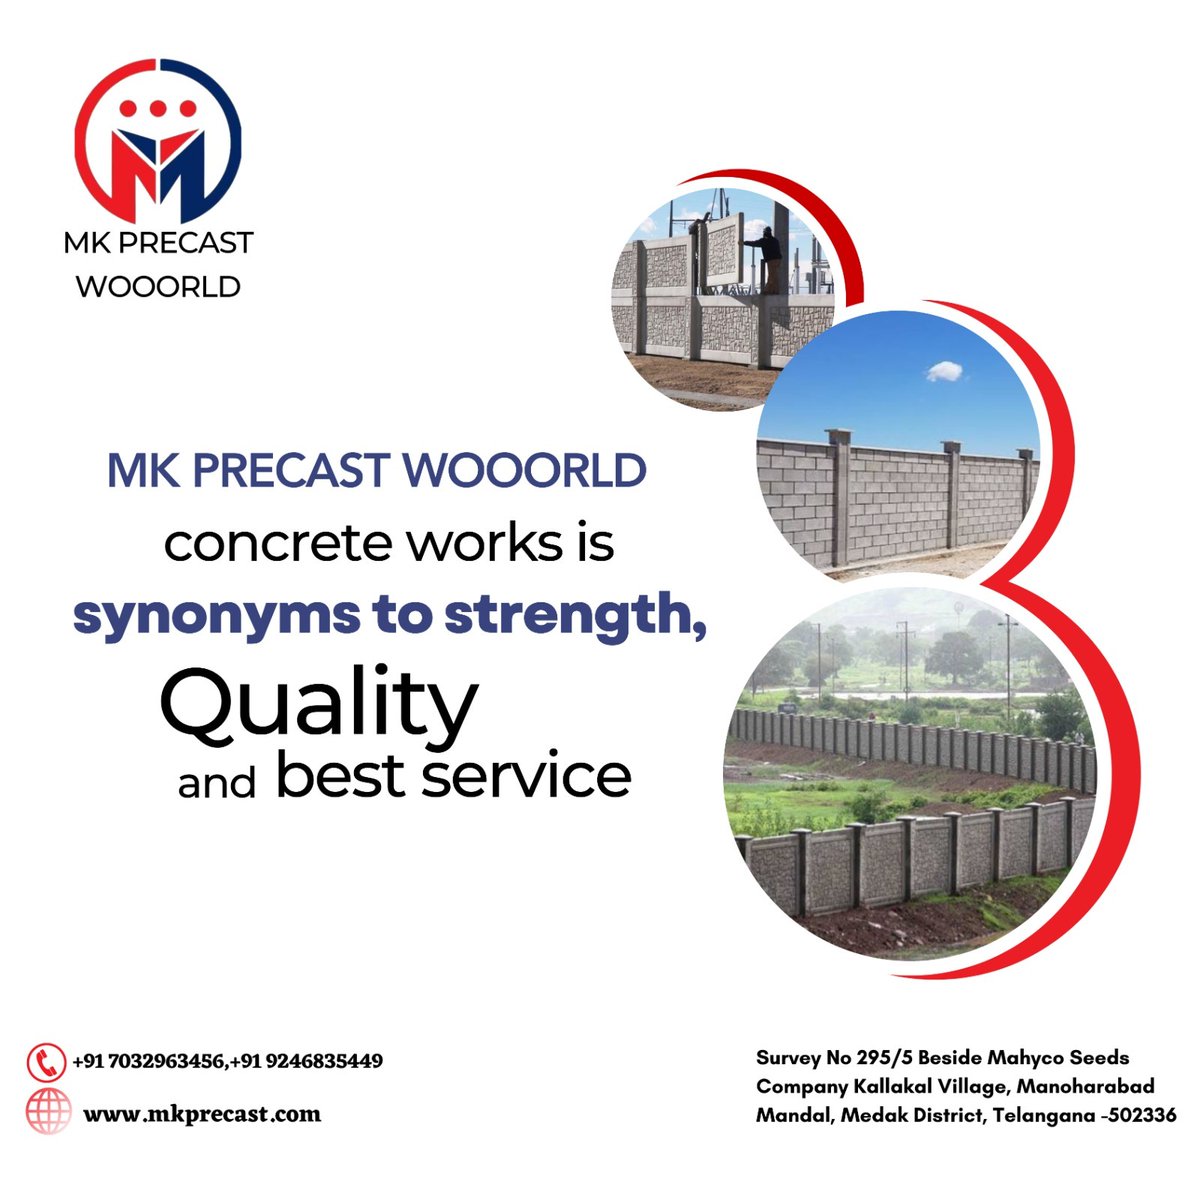 🏗️ Building Dreams with MK Precast 🏗️
When it comes to concrete works, MK Precast stands tall as a synonym for strength, quality, and unmatched services. 
#MKPrecastWorld #PropertyBoundaries #FrontStreetElegance #VersatilePrecastSolutions #AestheticAppeal #Functionality #Custome